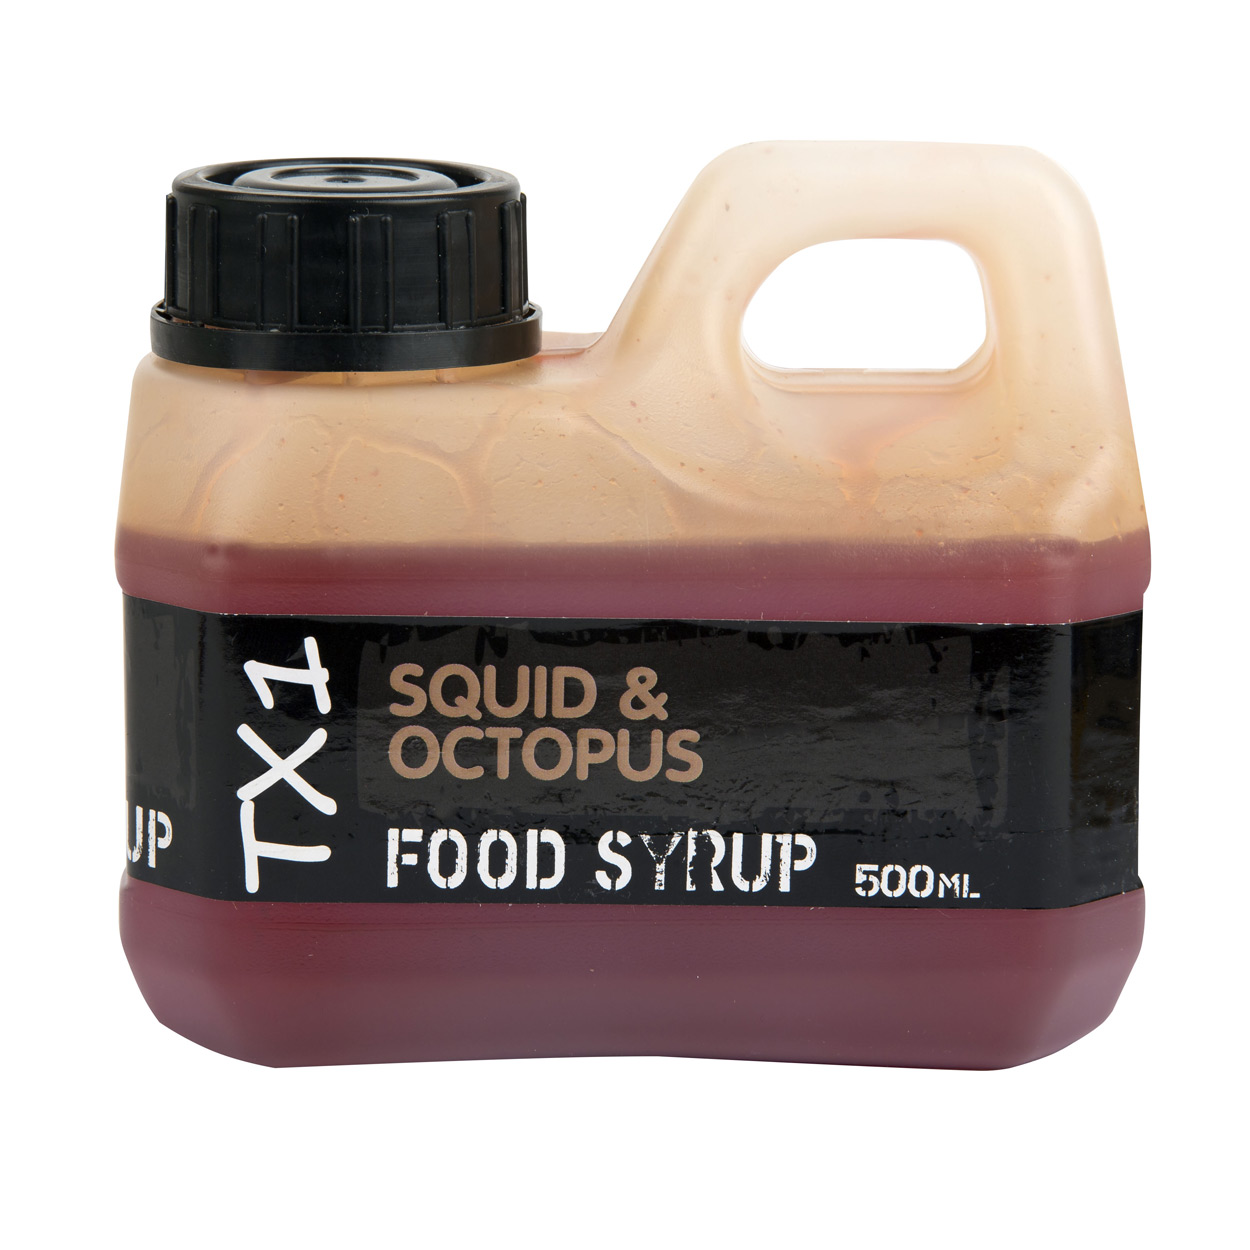 Shimano TX1 Food Syrup Attractant Squid & Octopus (500ml)